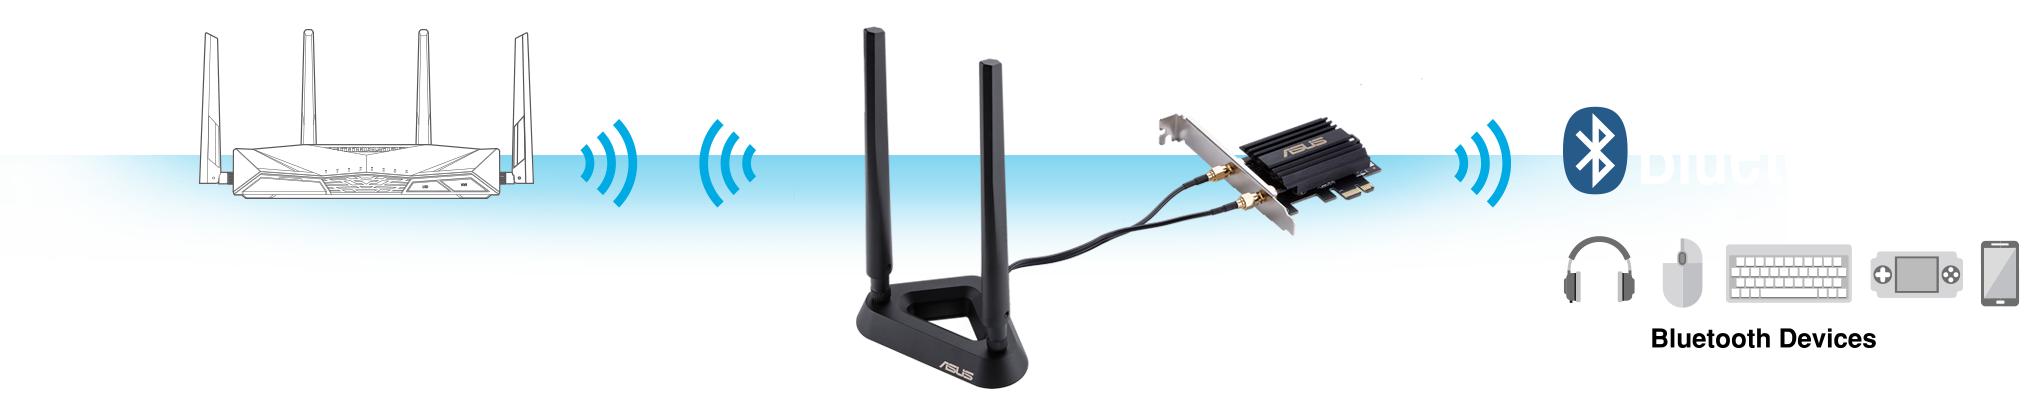 ASUS PEC-AX58BT offers an immediate upgrade to the latest Bluetooth 5.0 technology.